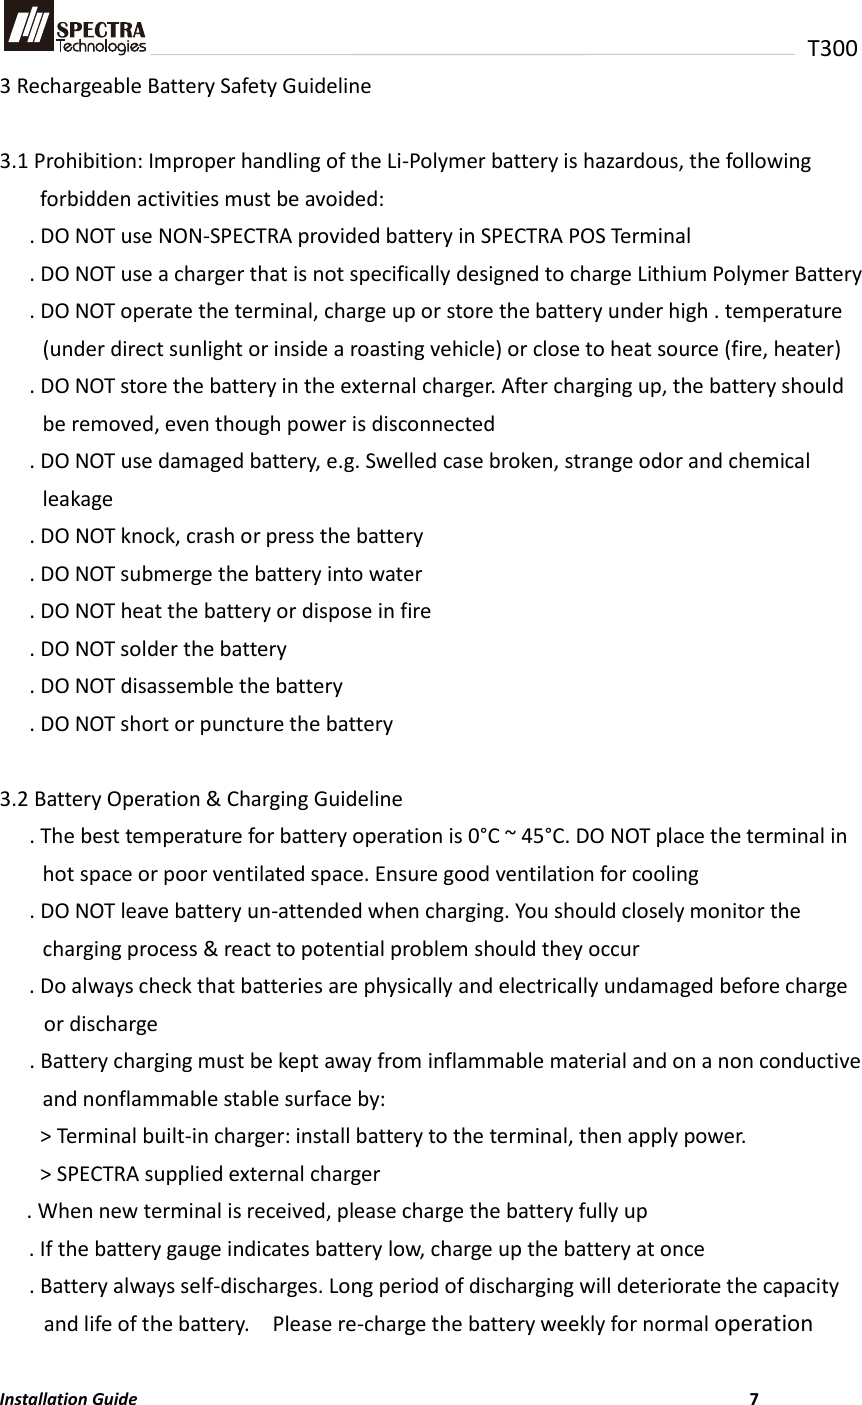   T300 3 Rechargeable Battery Safety Guideline  3.1 Prohibition: Improper handling of the Li-Polymer battery is hazardous, the following forbidden activities must be avoided: . DO NOT use NON-SPECTRA provided battery in SPECTRA POS Terminal . DO NOT use a charger that is not specifically designed to charge Lithium Polymer Battery . DO NOT operate the terminal, charge up or store the battery under high . temperature (under direct sunlight or inside a roasting vehicle) or close to heat source (fire, heater) . DO NOT store the battery in the external charger. After charging up, the battery should be removed, even though power is disconnected . DO NOT use damaged battery, e.g. Swelled case broken, strange odor and chemical leakage   . DO NOT knock, crash or press the battery . DO NOT submerge the battery into water . DO NOT heat the battery or dispose in fire . DO NOT solder the battery . DO NOT disassemble the battery . DO NOT short or puncture the battery  3.2 Battery Operation &amp; Charging Guideline . The best temperature for battery operation is 0°C ~ 45°C. DO NOT place the terminal in hot space or poor ventilated space. Ensure good ventilation for cooling . DO NOT leave battery un-attended when charging. You should closely monitor the charging process &amp; react to potential problem should they occur . Do always check that batteries are physically and electrically undamaged before charge or discharge . Battery charging must be kept away from inflammable material and on a non conductive and nonflammable stable surface by: &gt; Terminal built-in charger: install battery to the terminal, then apply power. &gt; SPECTRA supplied external charger . When new terminal is received, please charge the battery fully up . If the battery gauge indicates battery low, charge up the battery at once . Battery always self-discharges. Long period of discharging will deteriorate the capacity and life of the battery.    Please re-charge the battery weekly for normal operation  Installation Guide                          7 